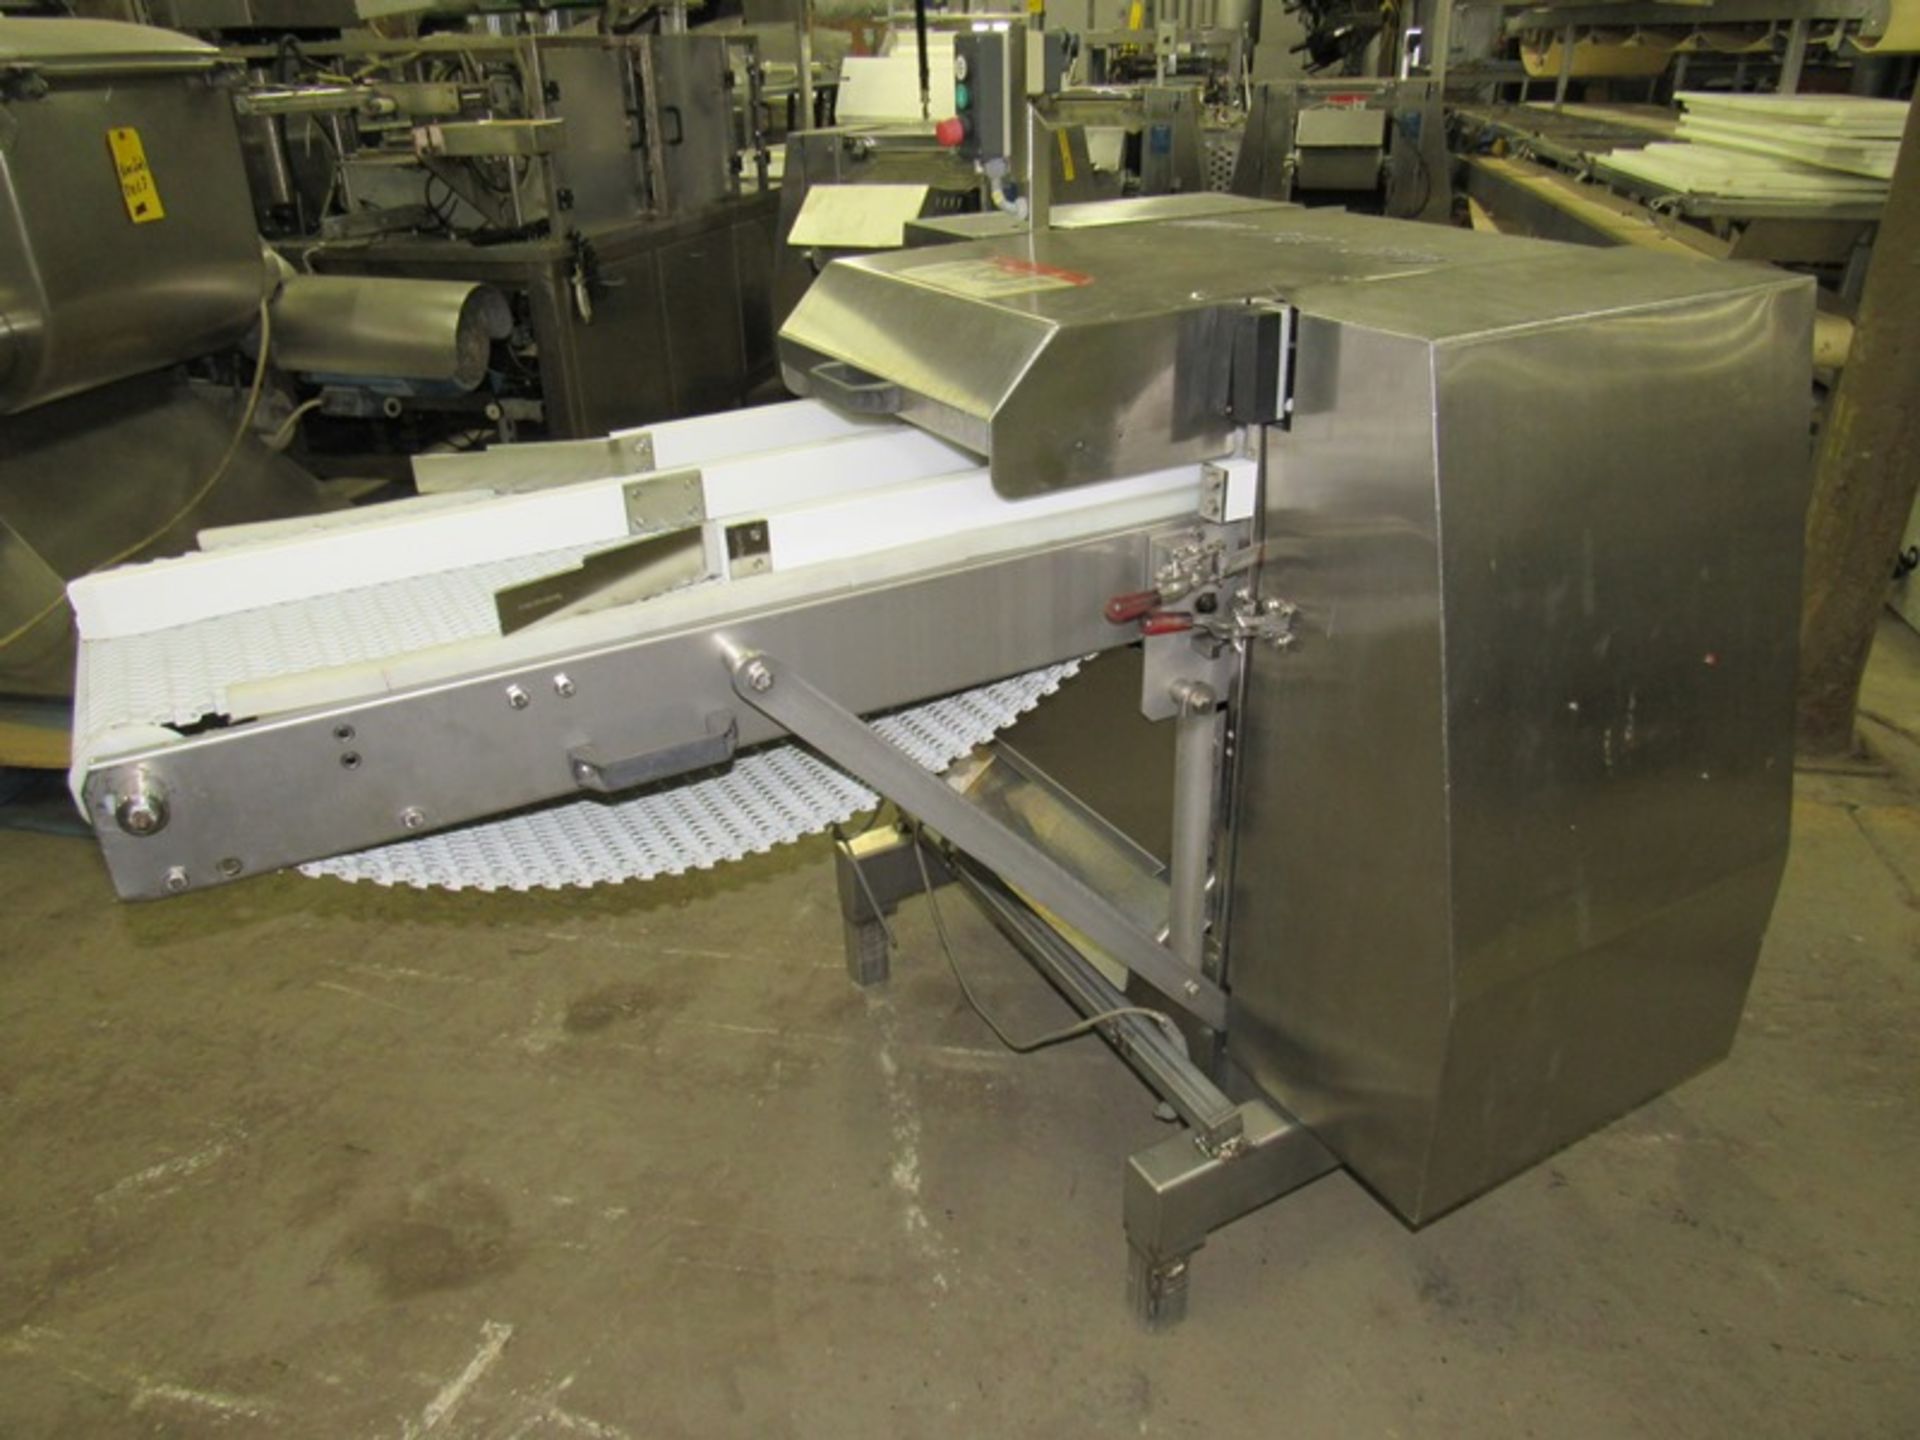 Baader Mdl. 620 Conveyorized Fish Skinner, 15" wide X 46" long infeed conveyor, 1.5 h.p., 140 volts, - Image 2 of 9